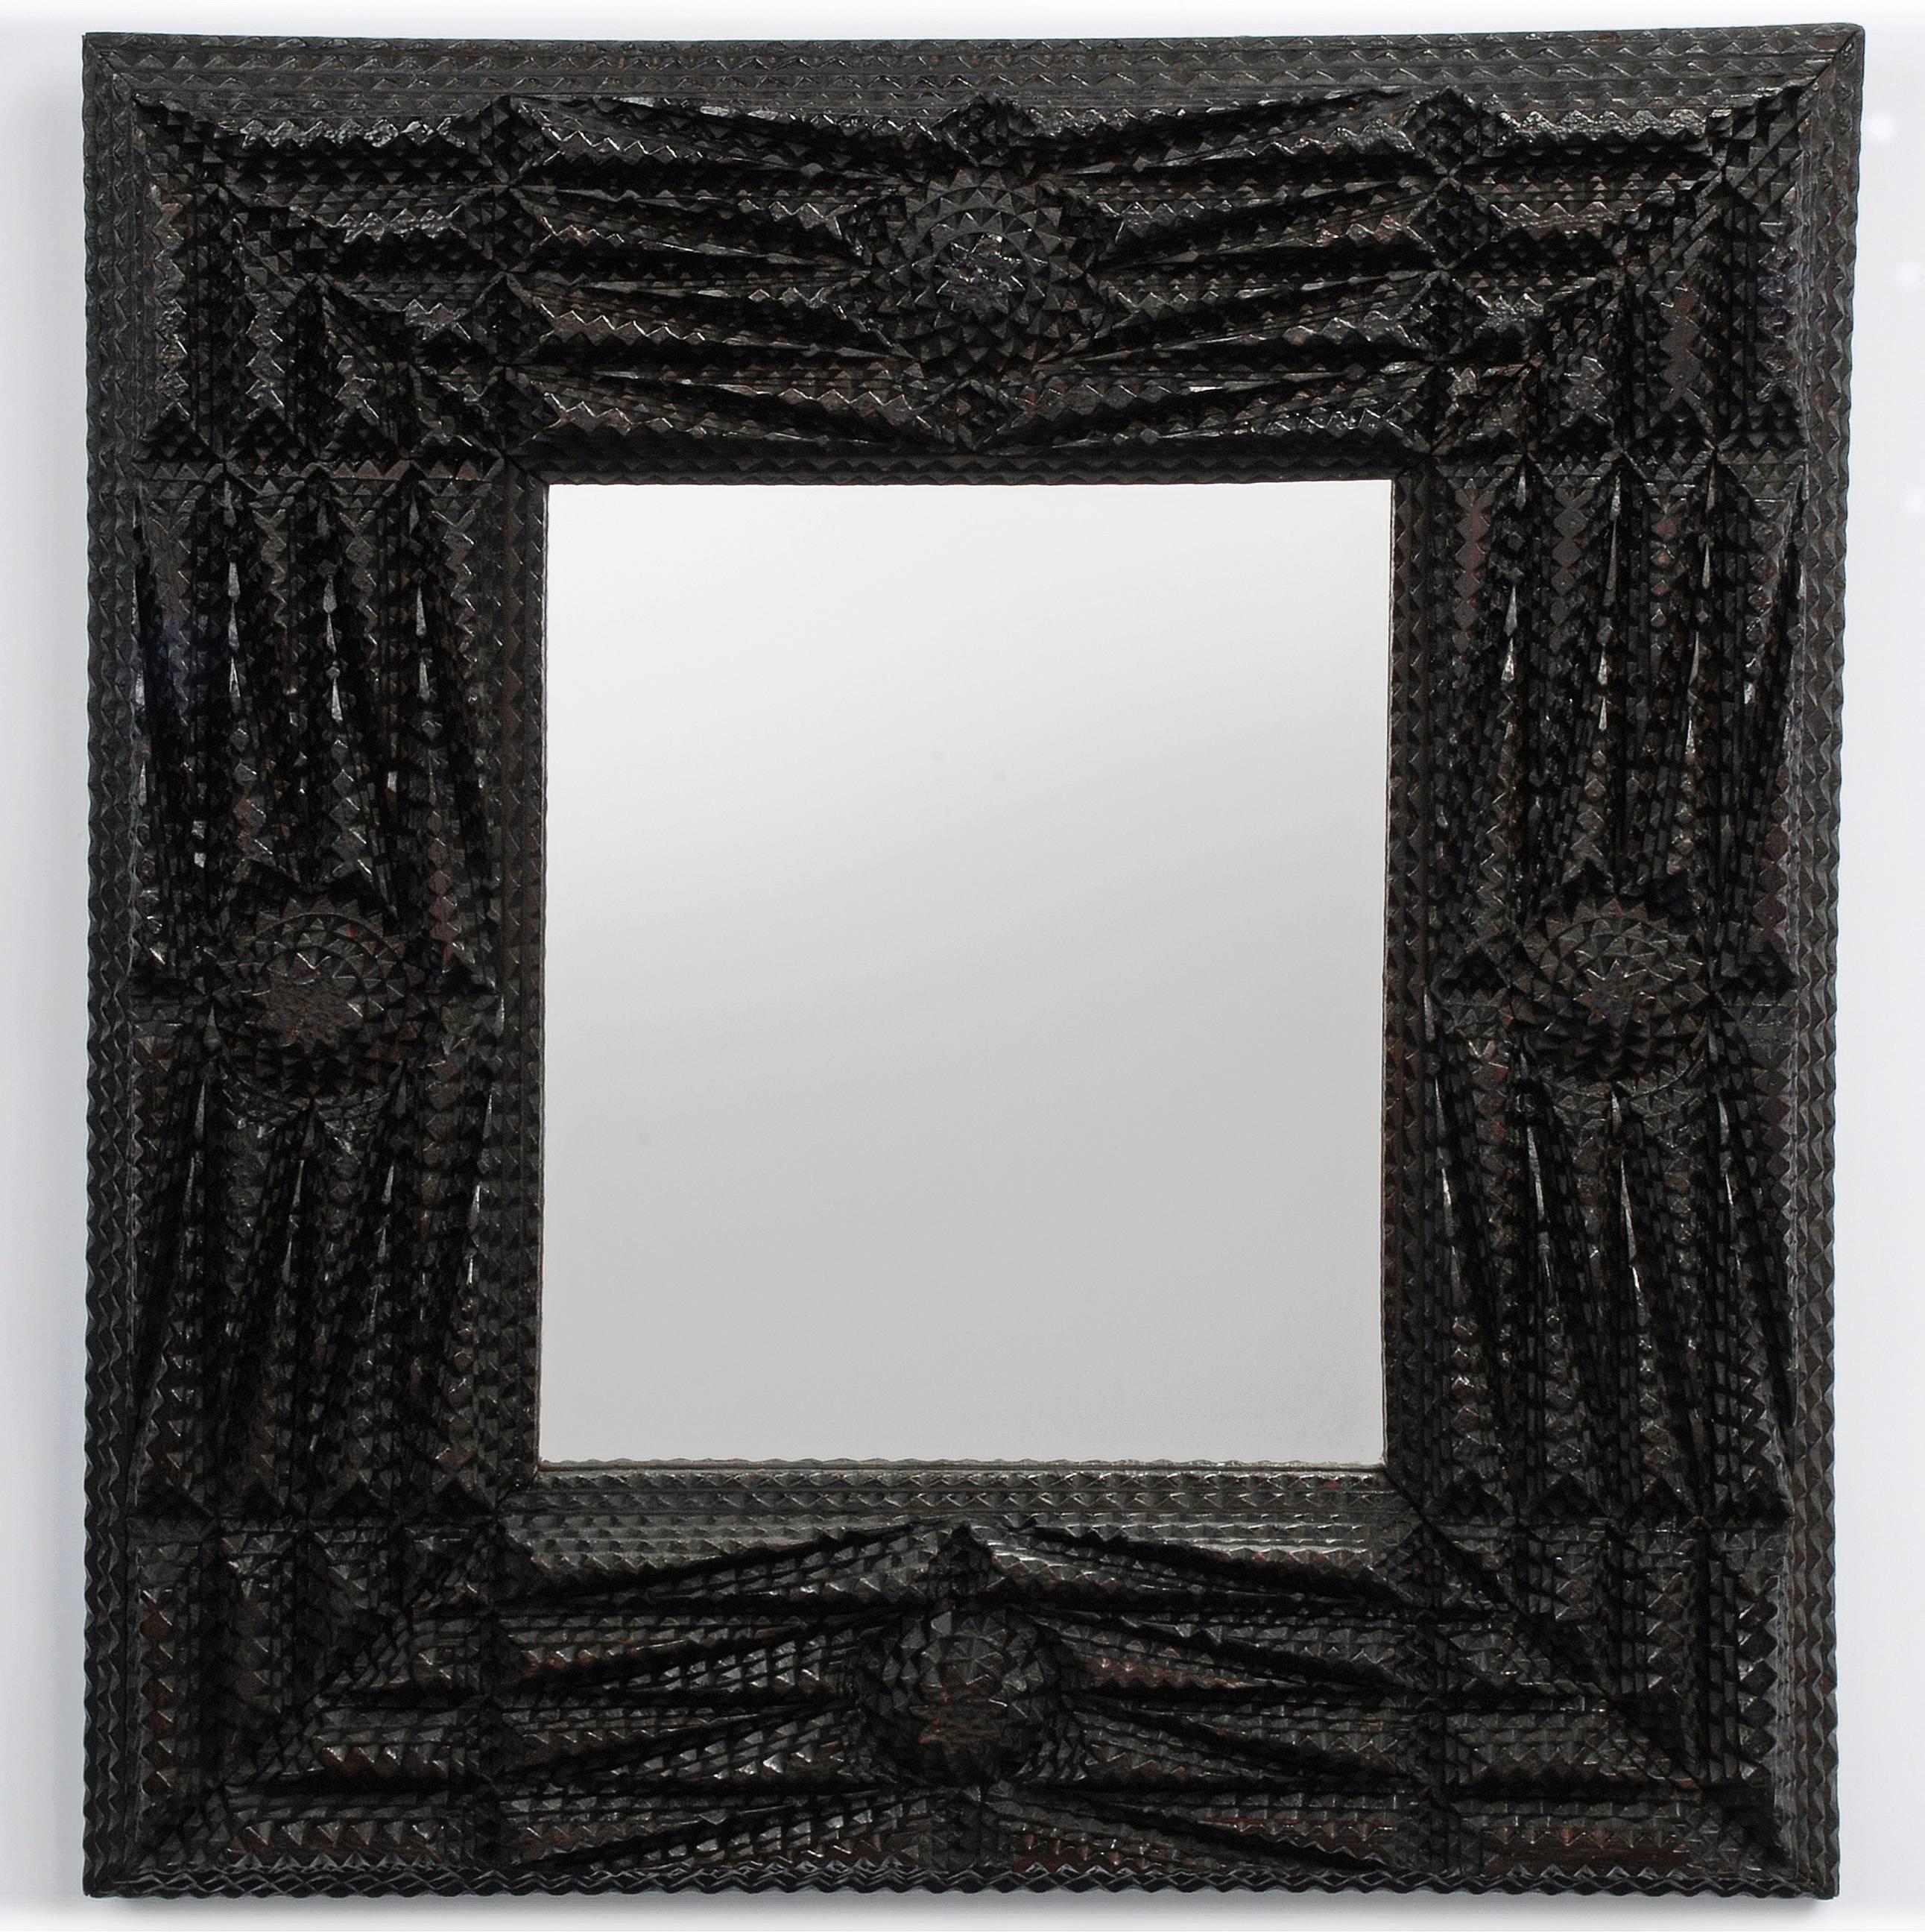 A deeply layered Tramp Art mirror profusely embellished with carved rosettes and strips of graduated layers.

New Orleans, LA,
circa 1890-1910.